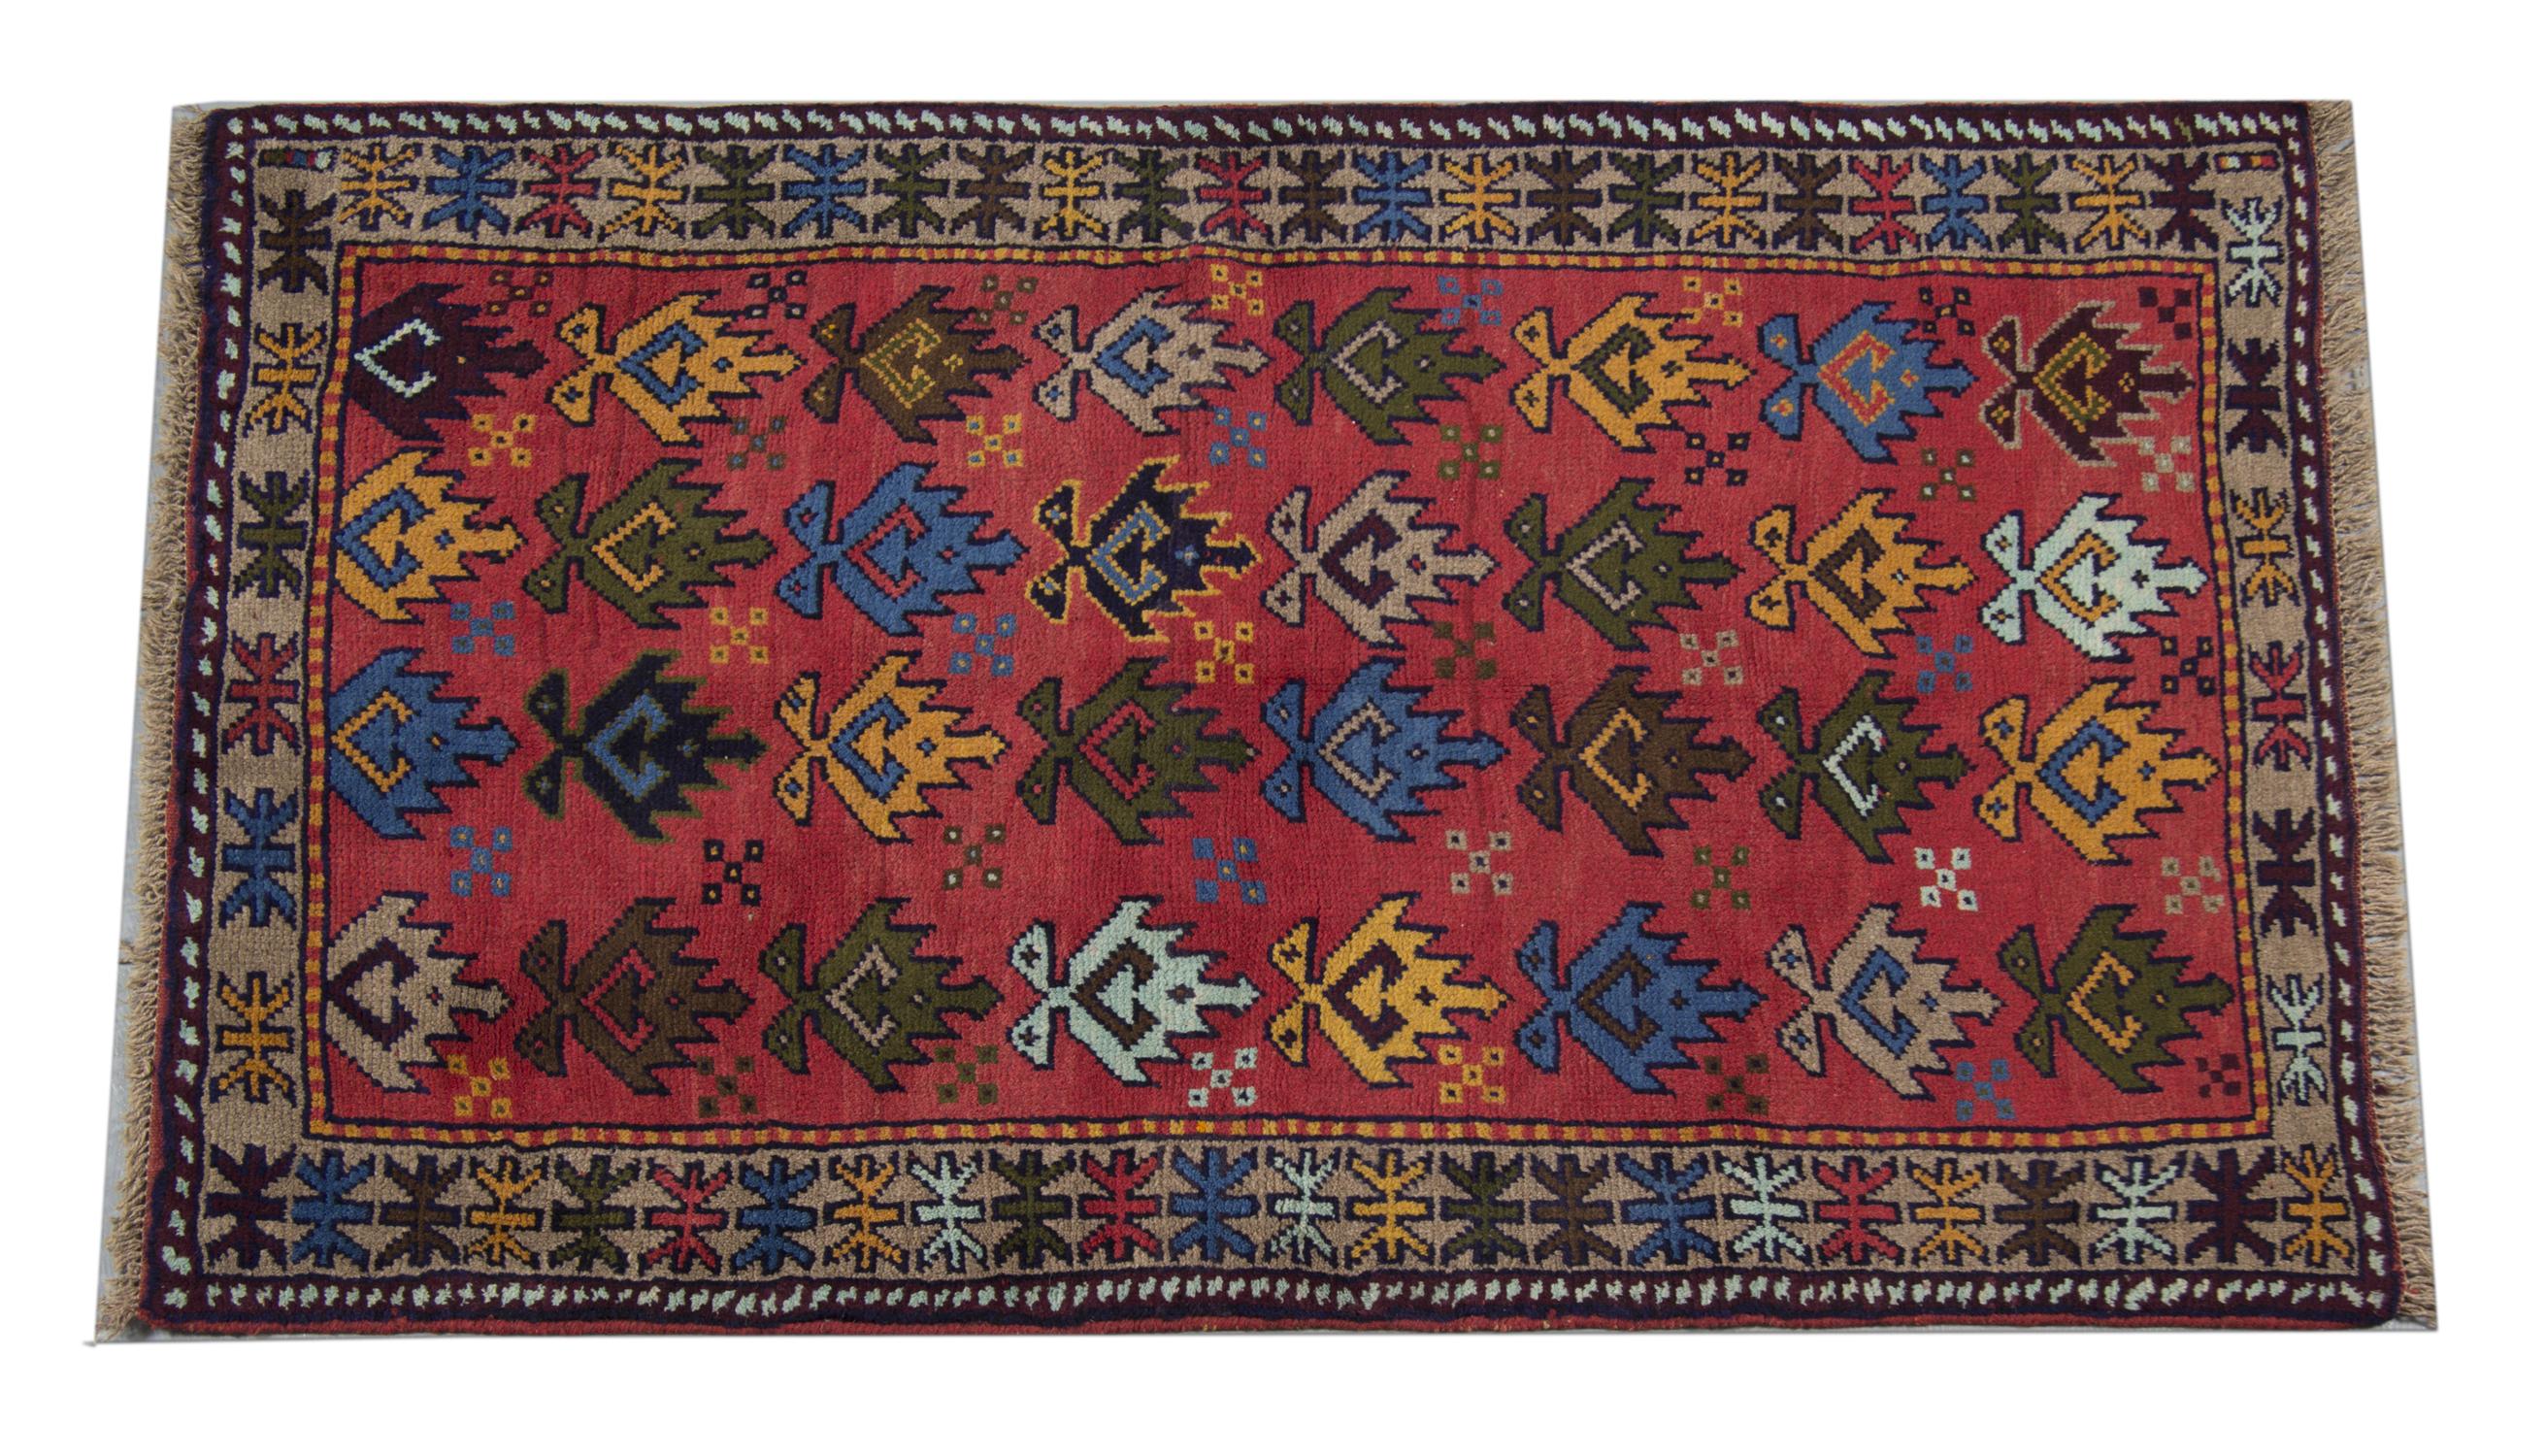 This elegant floral carpet was woven by hand in the 1990s. The central design has been woven on a rich red background with geometric motifs in green, yellow, and blue accents. Both the colour and design in this piece make it the perfect accent rug.